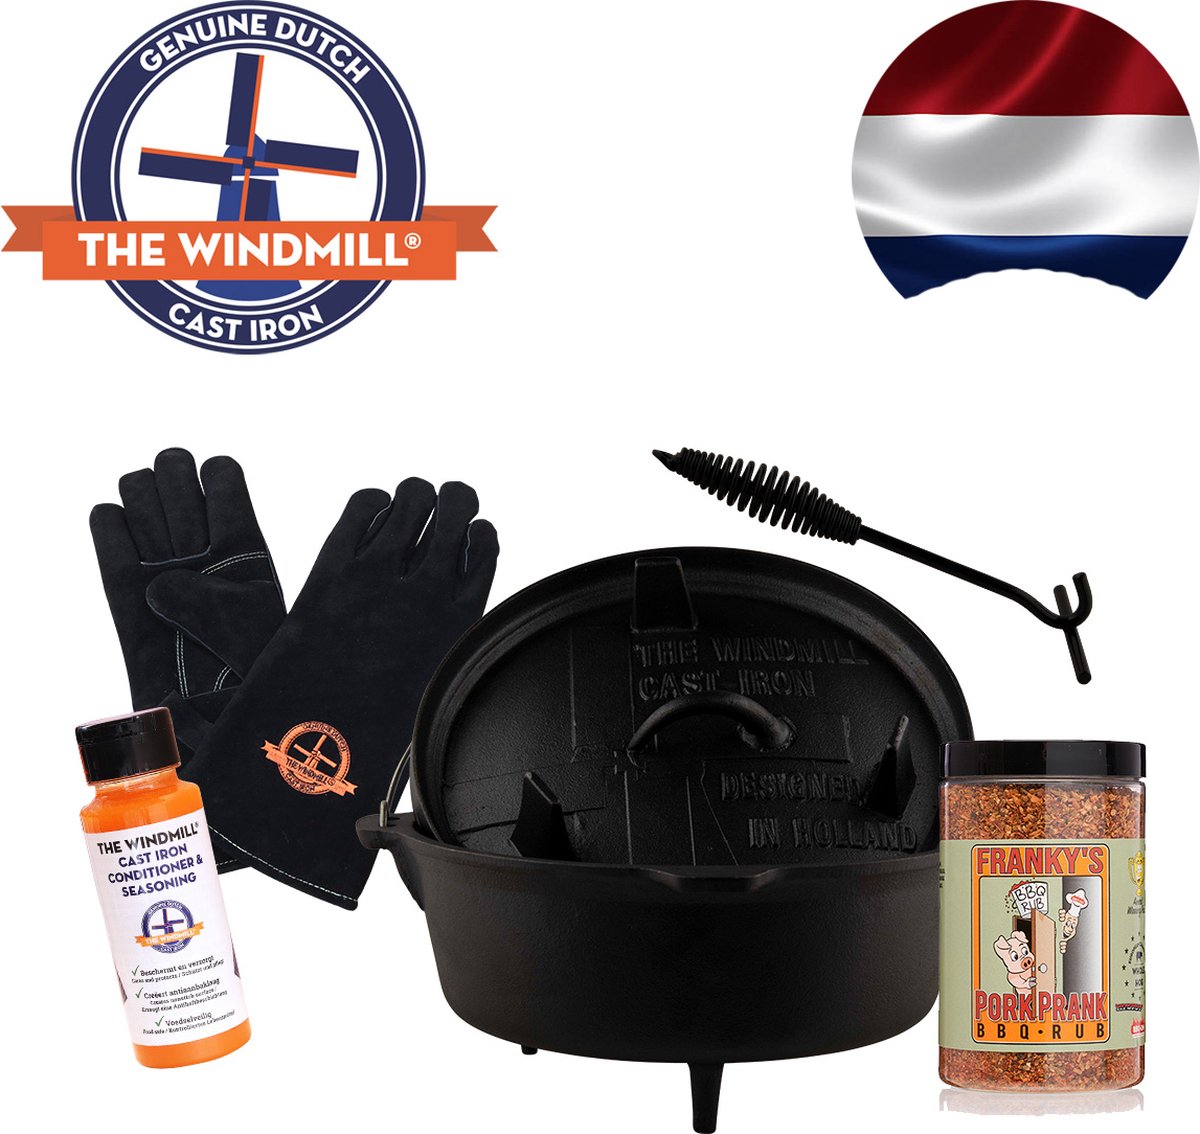 The Windmill Cast Iron - Combo-deal- King of the ribs